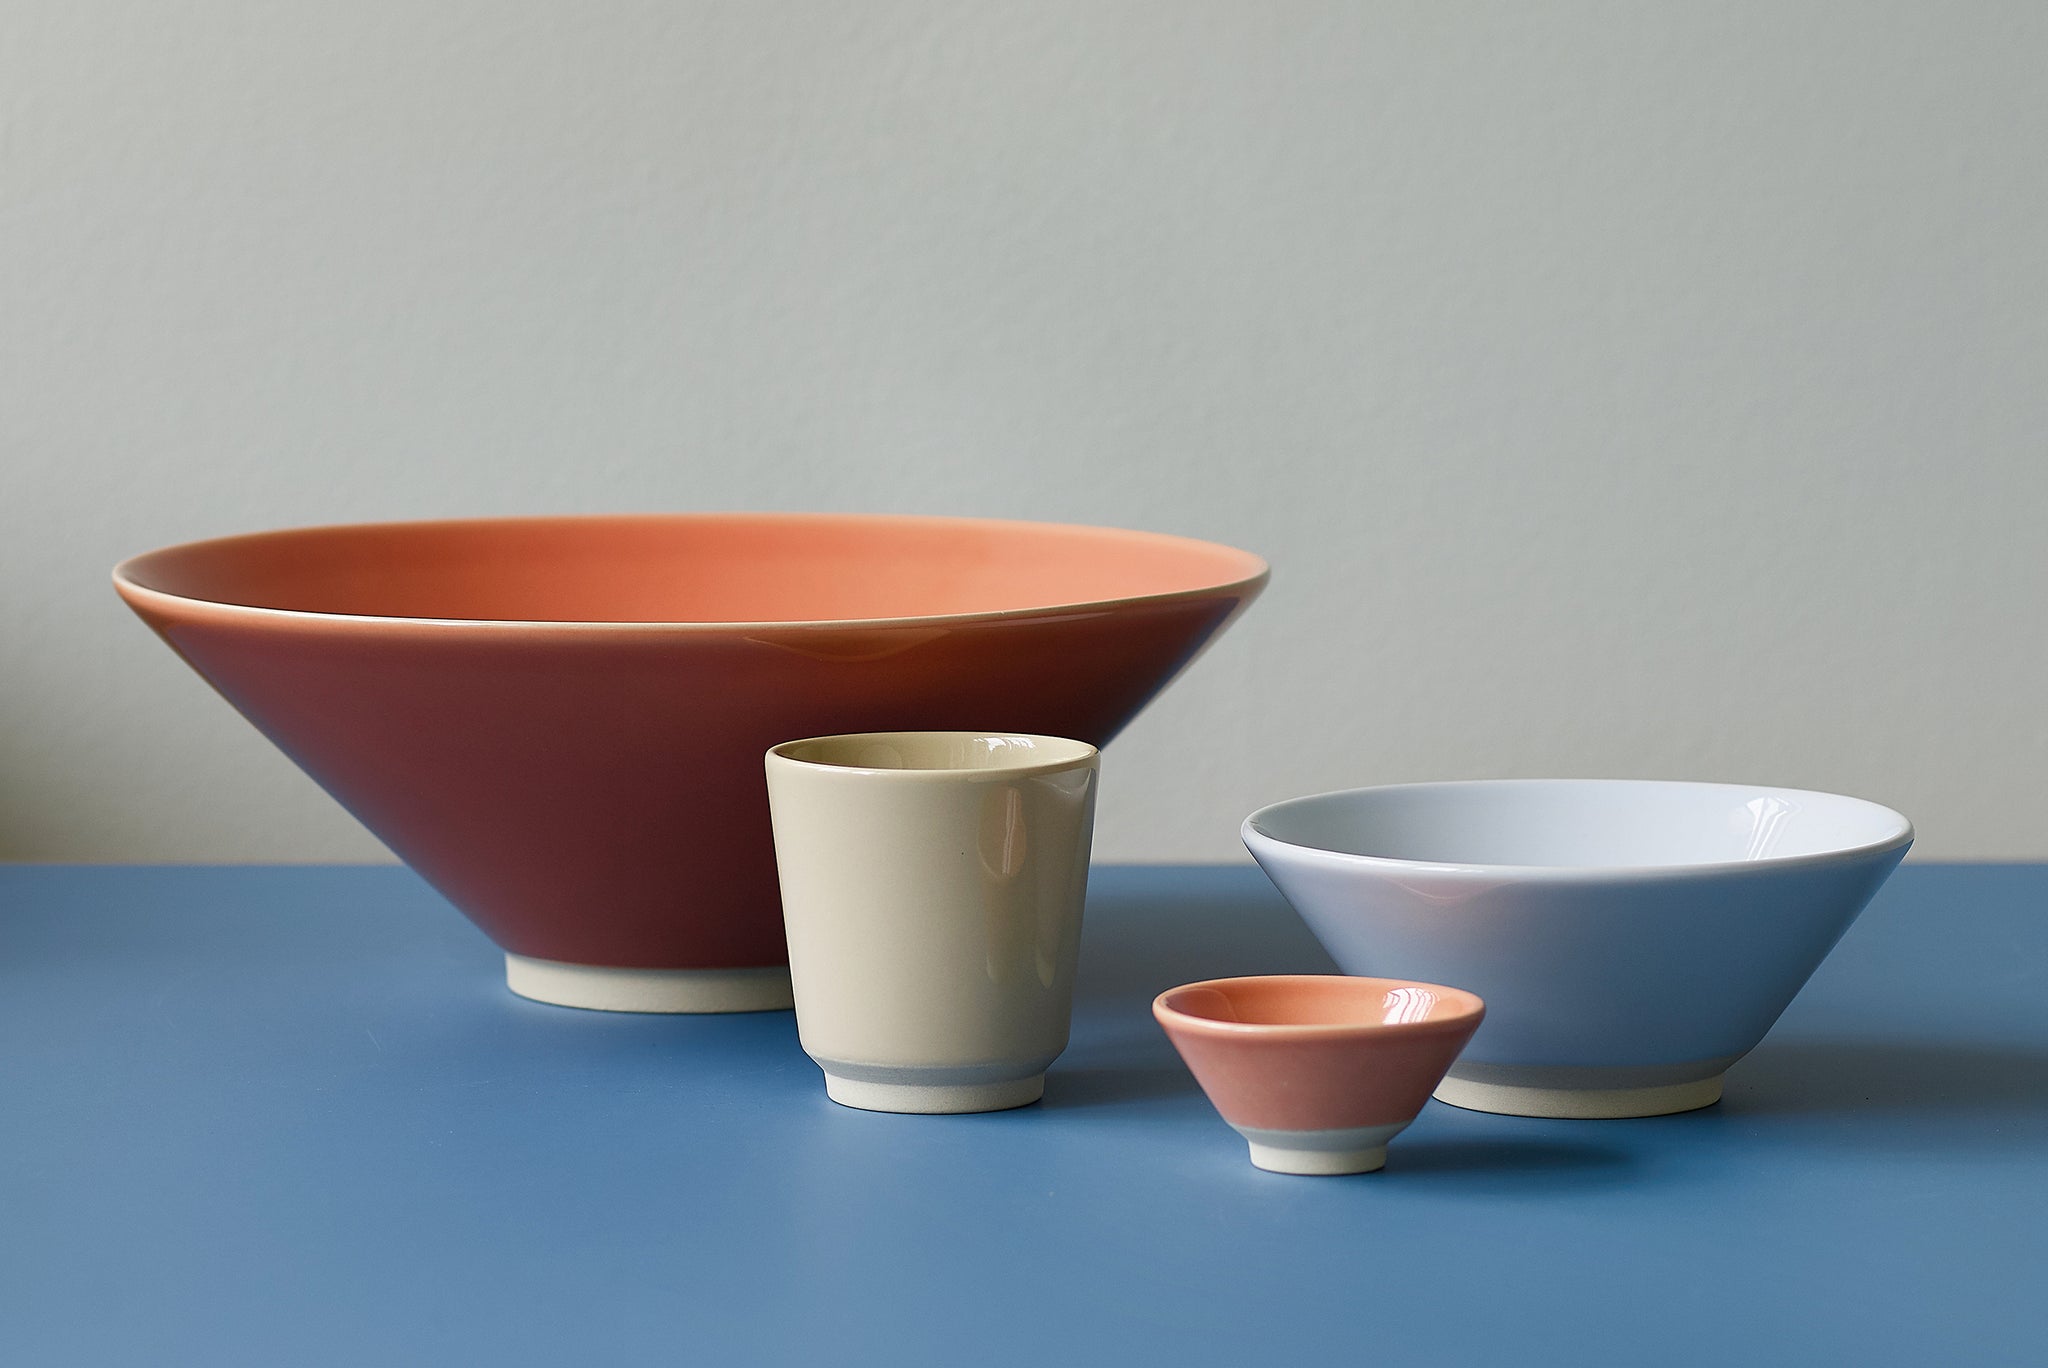 Stilleben's Memphis Stoneware series is a colorful collection of bowls, cups and plates with geometric yet graceful shapes.